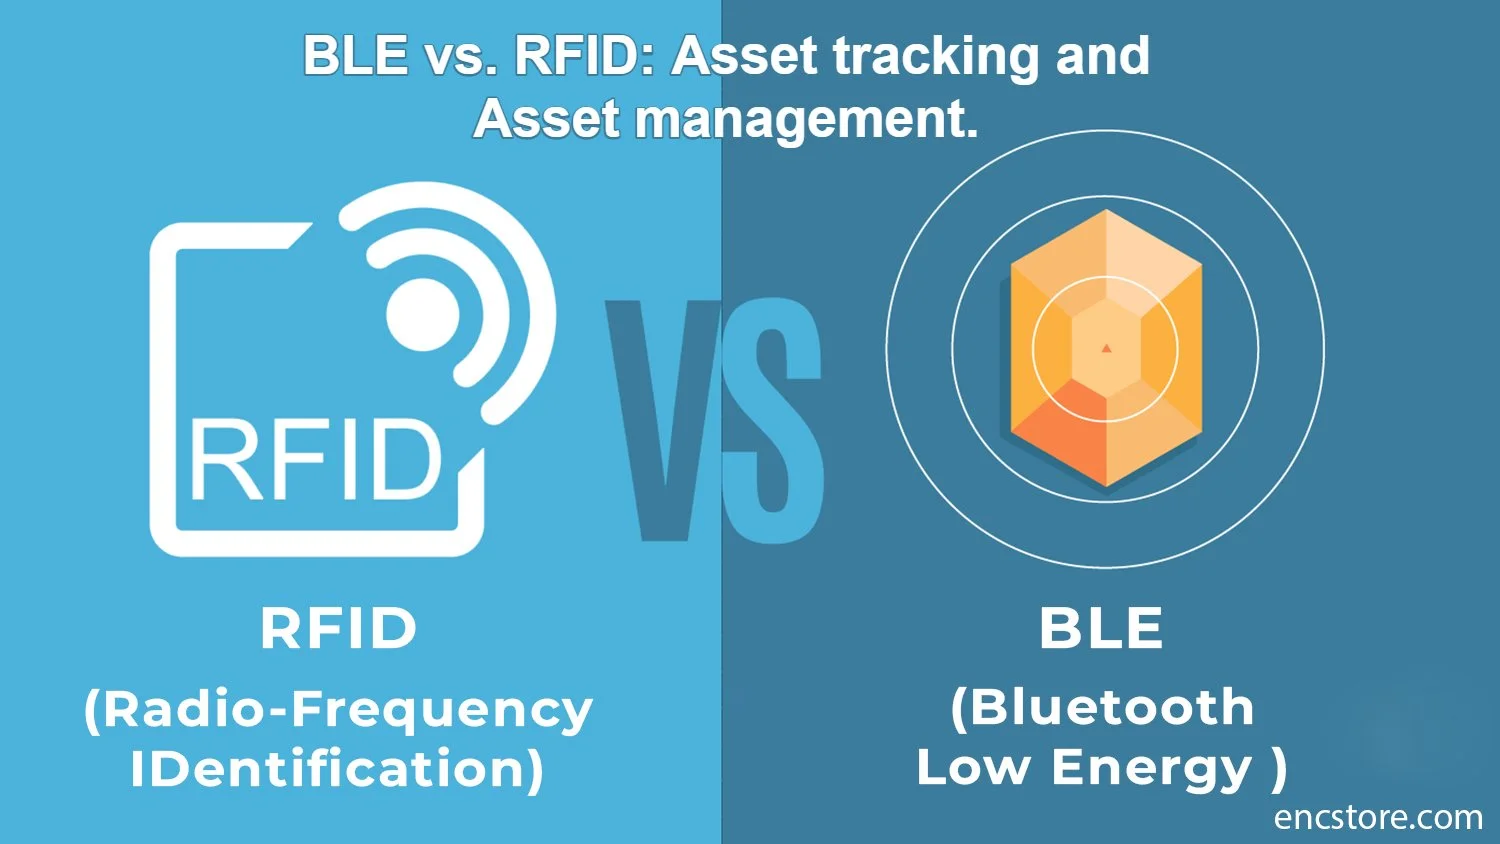 BLE vs. RFID: Asset tracking and Asset management